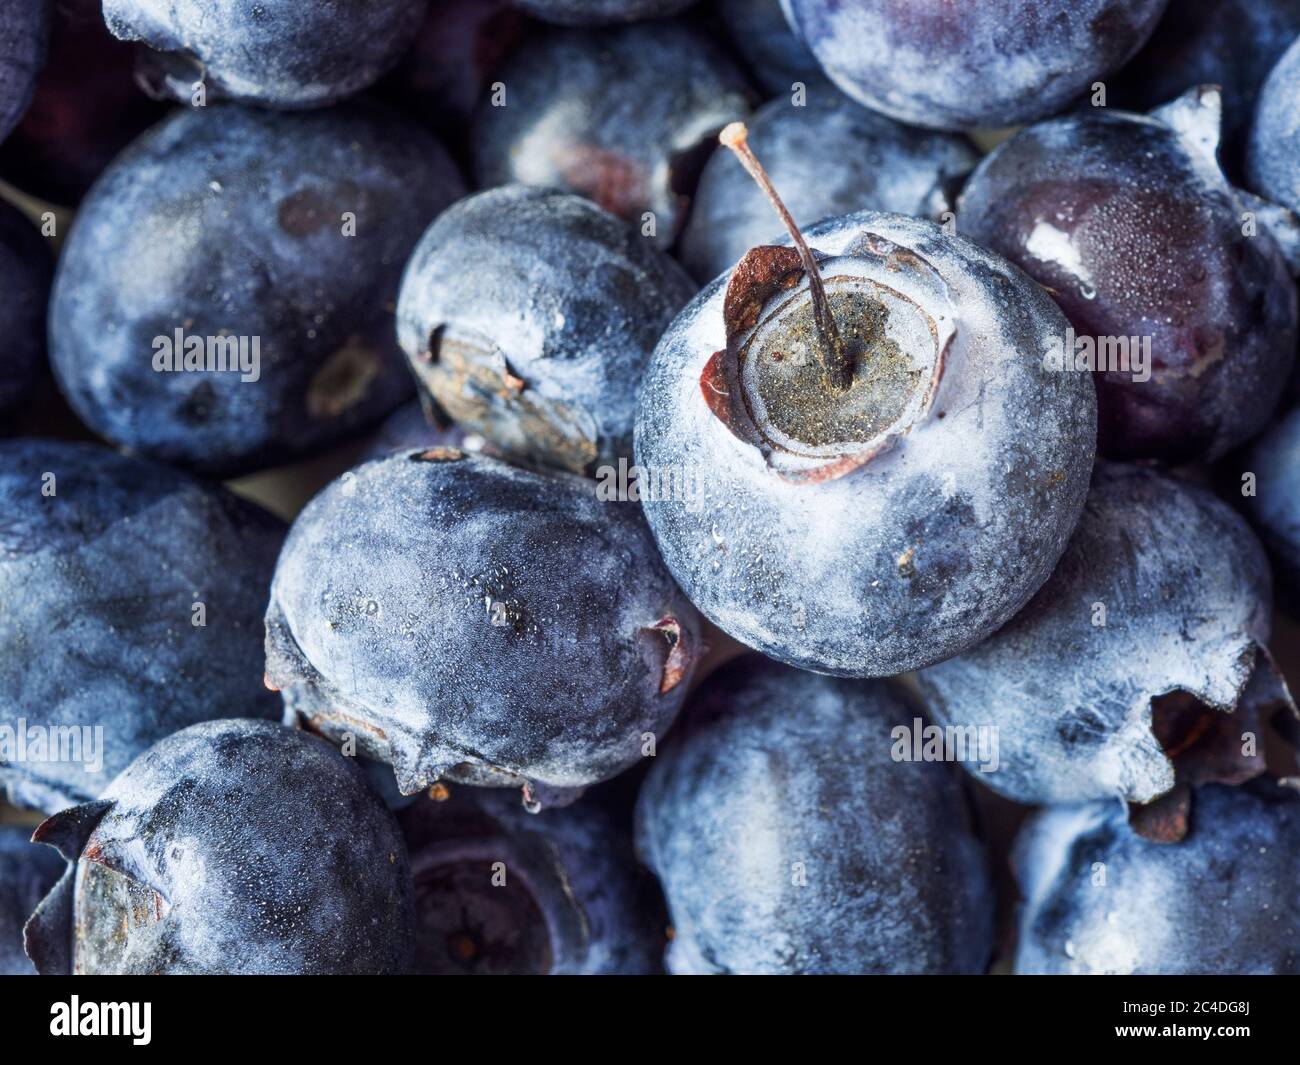 Close up of fresh blueberries one with a stalk Stock Photo